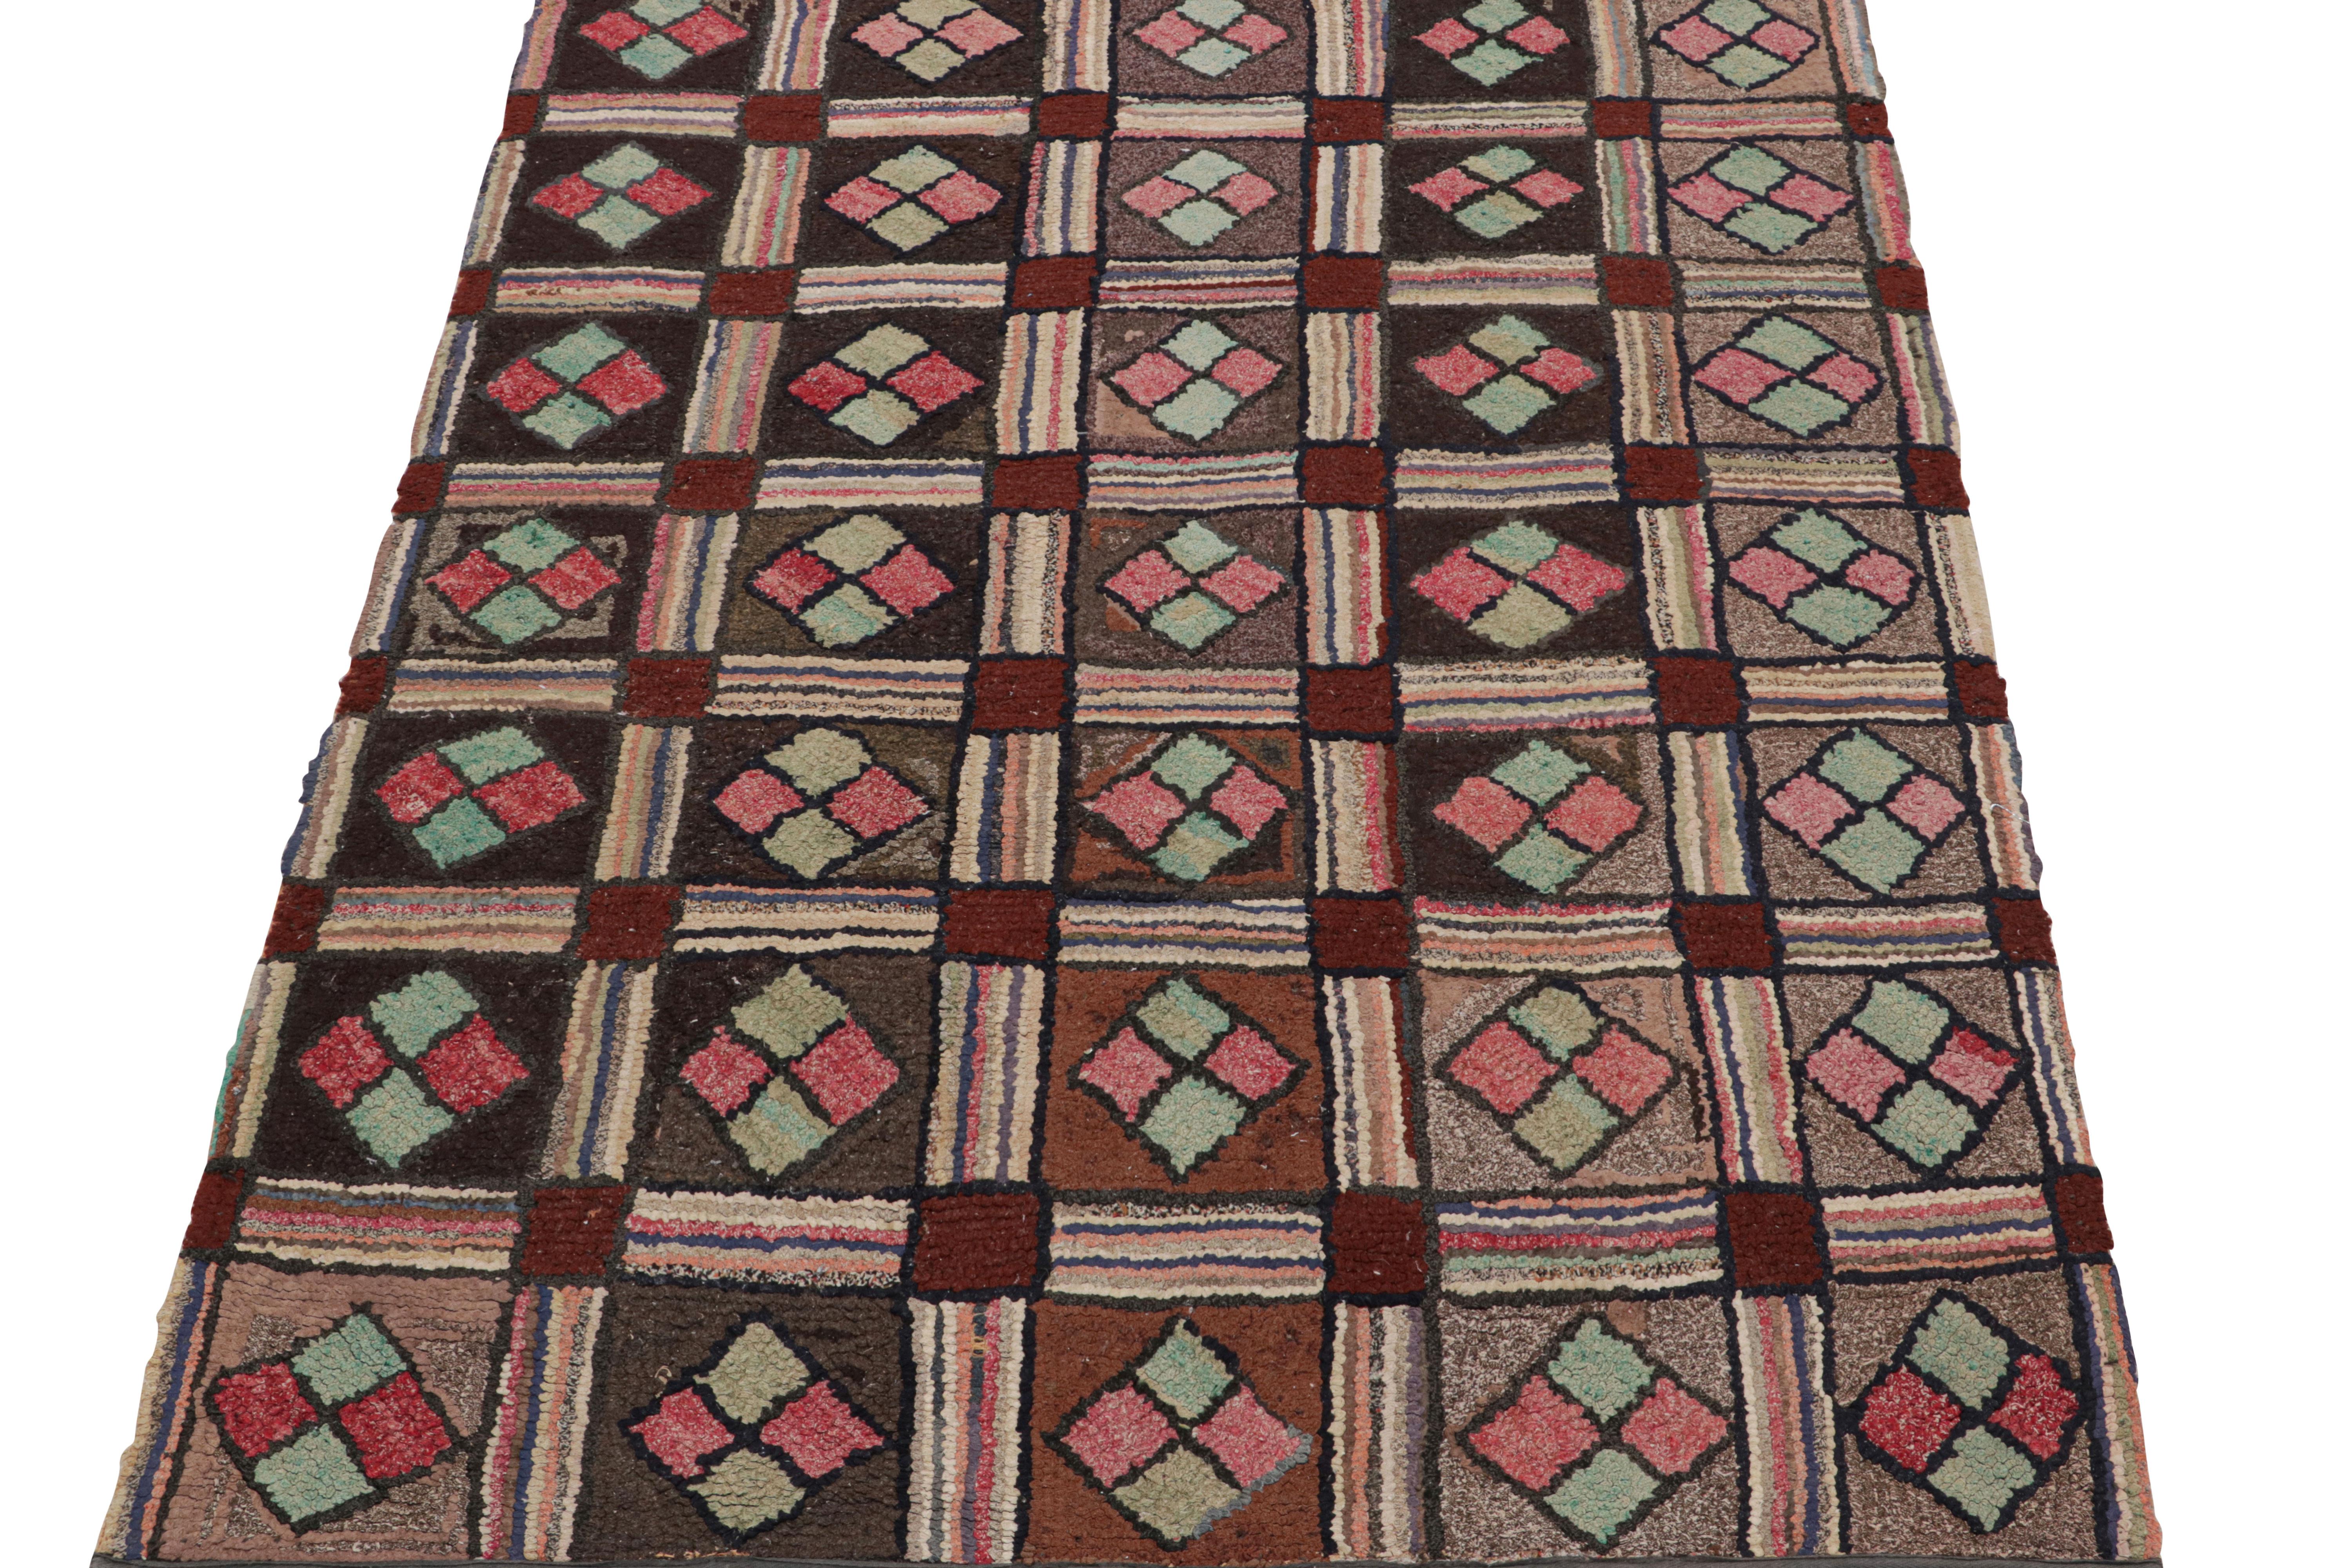 American Antique Hooked Rug with Brown, Red and Blue Geometric Patterns, from Rug & Kilim For Sale